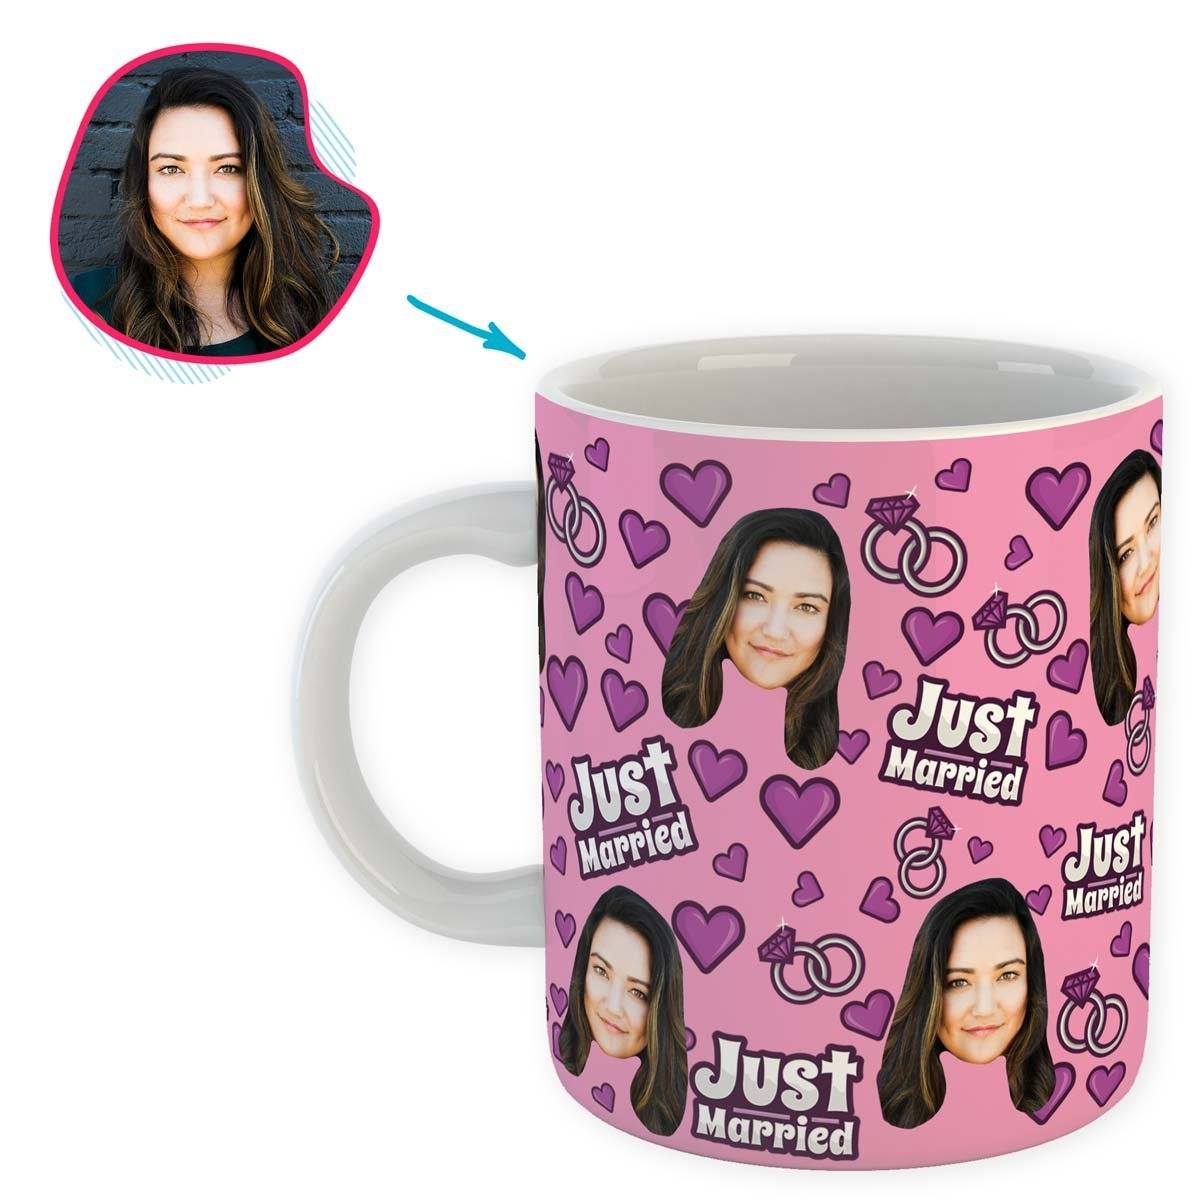 pink Just Married mug personalized with photo of face printed on it